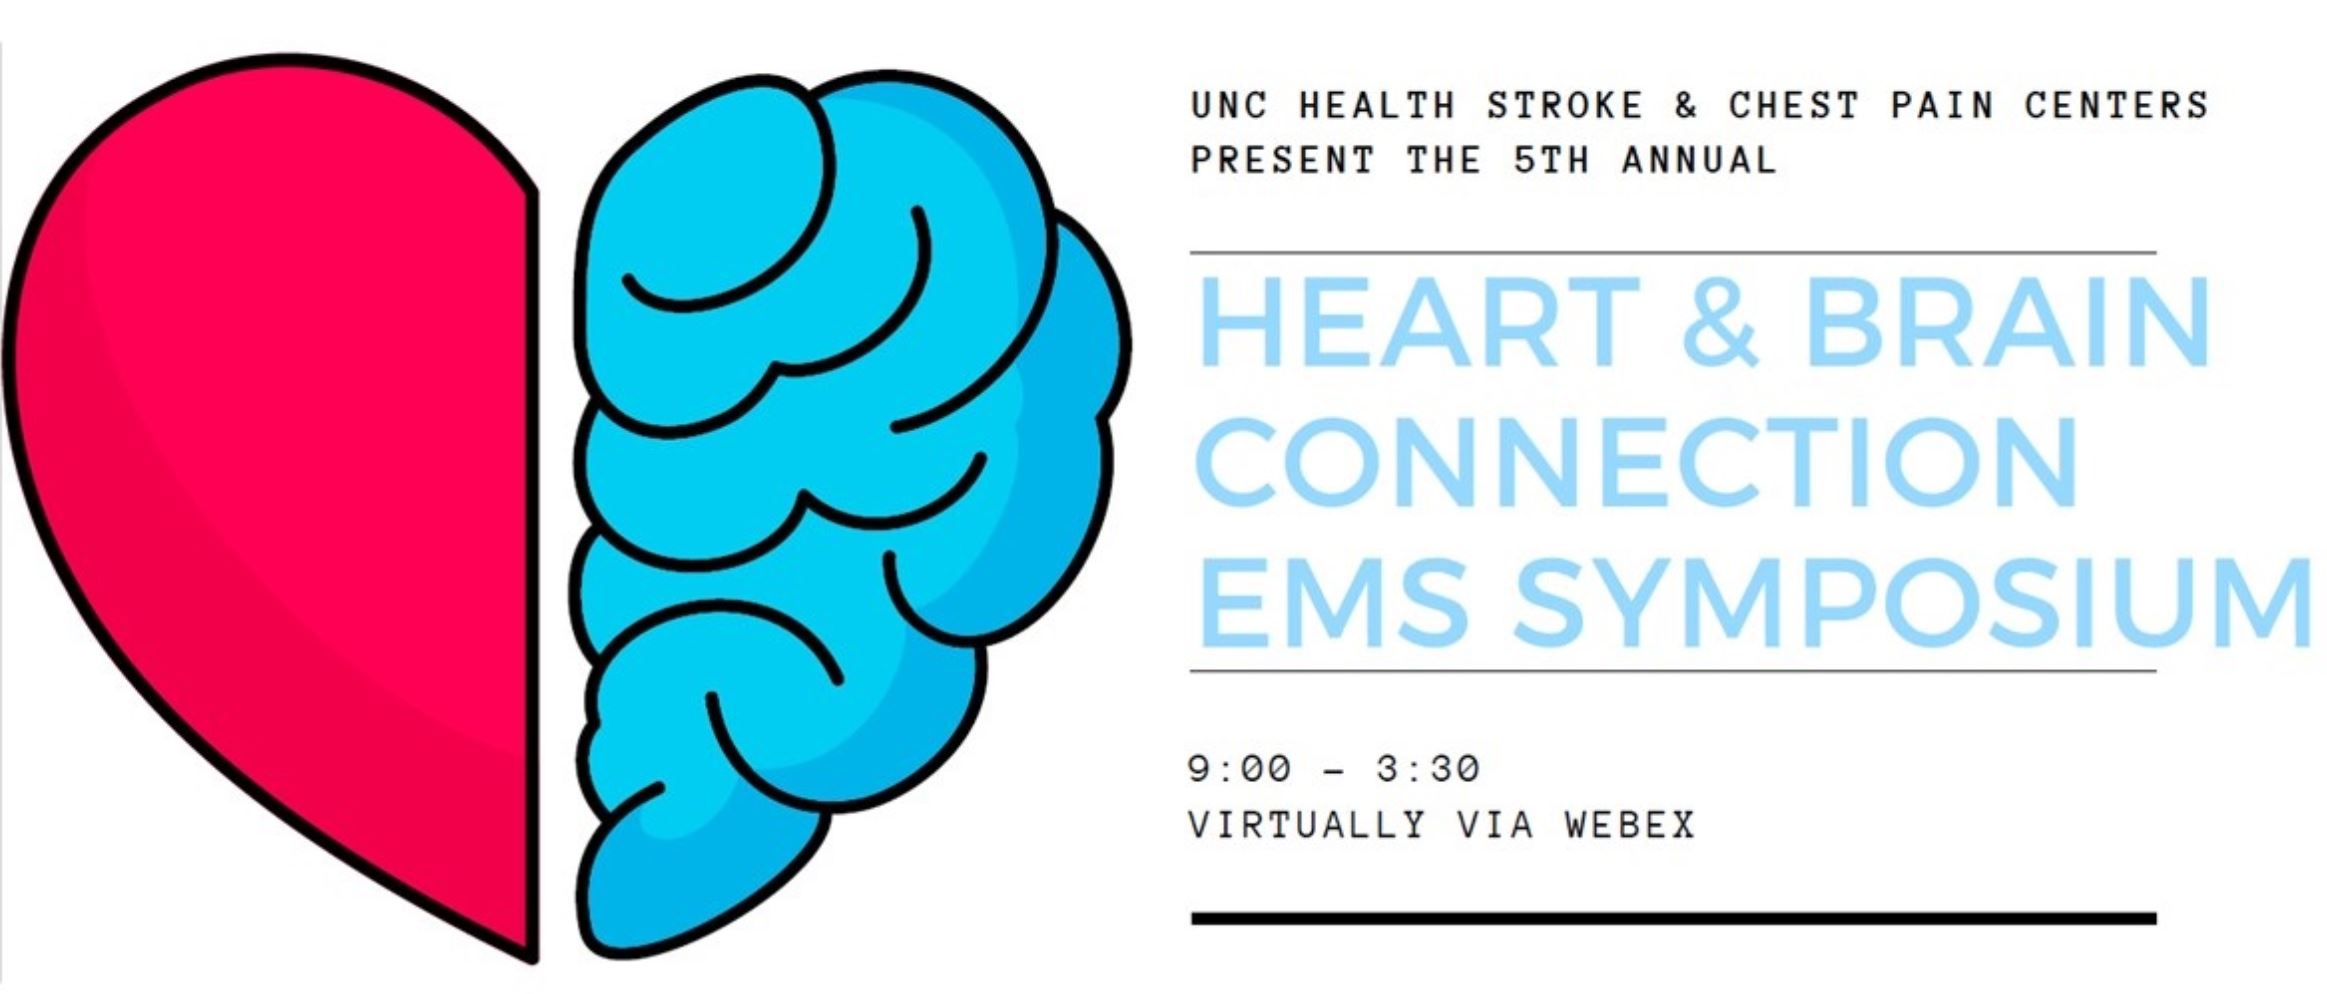 Heart and Brain Connection EMS Symposium